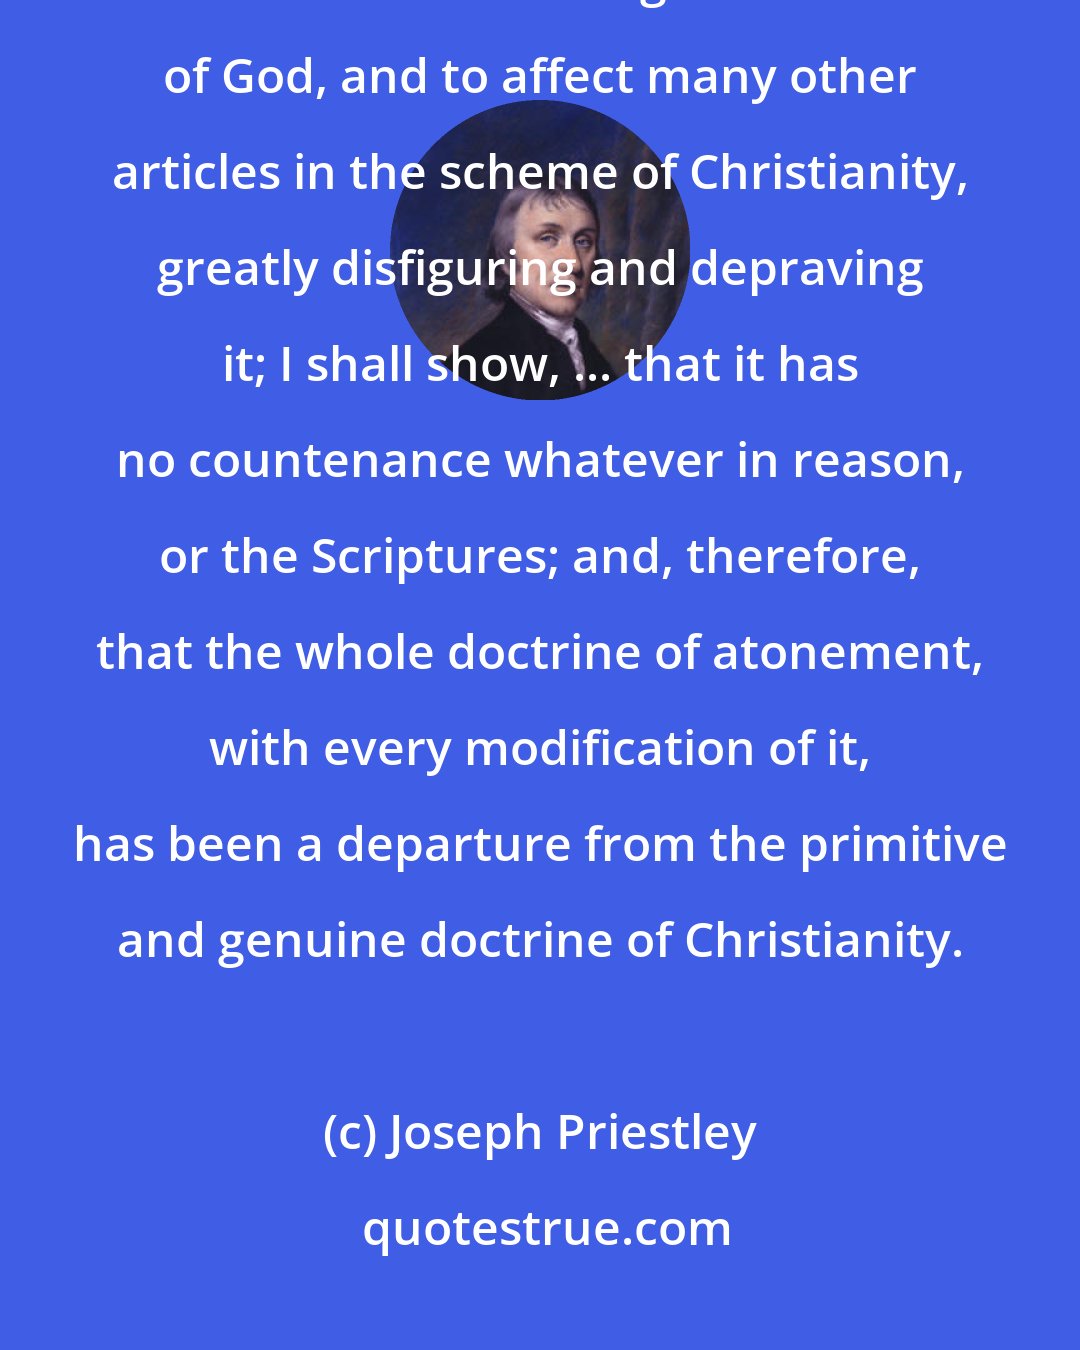 Joseph Priestley: As I conceive this doctrine to be a gross misrepresentation of the character and moral government of God, and to affect many other articles in the scheme of Christianity, greatly disfiguring and depraving it; I shall show, ... that it has no countenance whatever in reason, or the Scriptures; and, therefore, that the whole doctrine of atonement, with every modification of it, has been a departure from the primitive and genuine doctrine of Christianity.